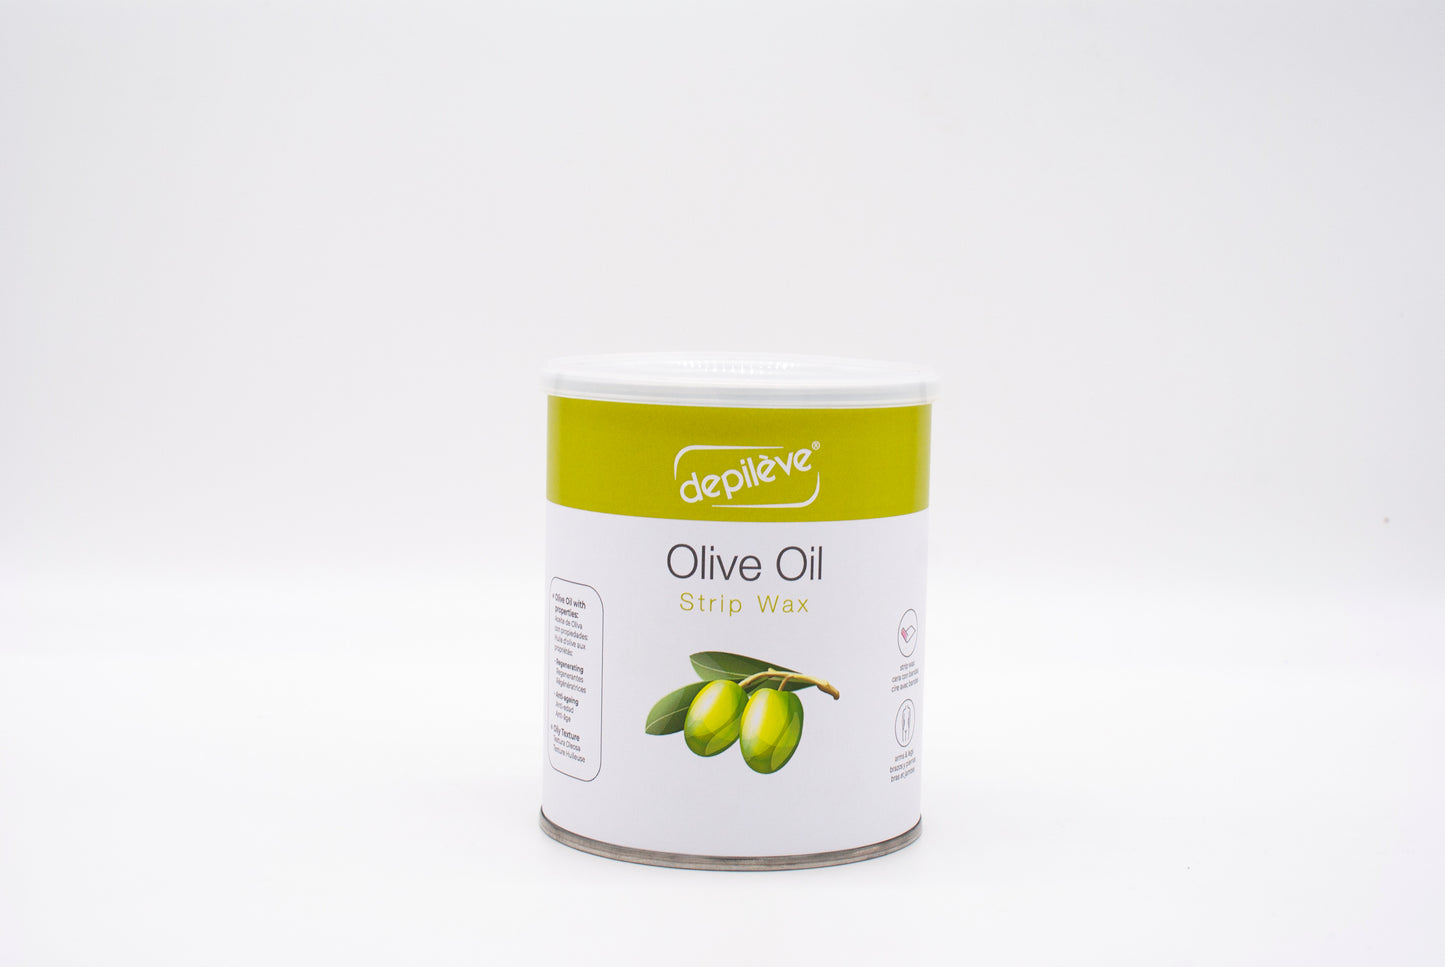 DEPILEVE ROSIN Olive Oil Wax 800g / Wax with olive oil